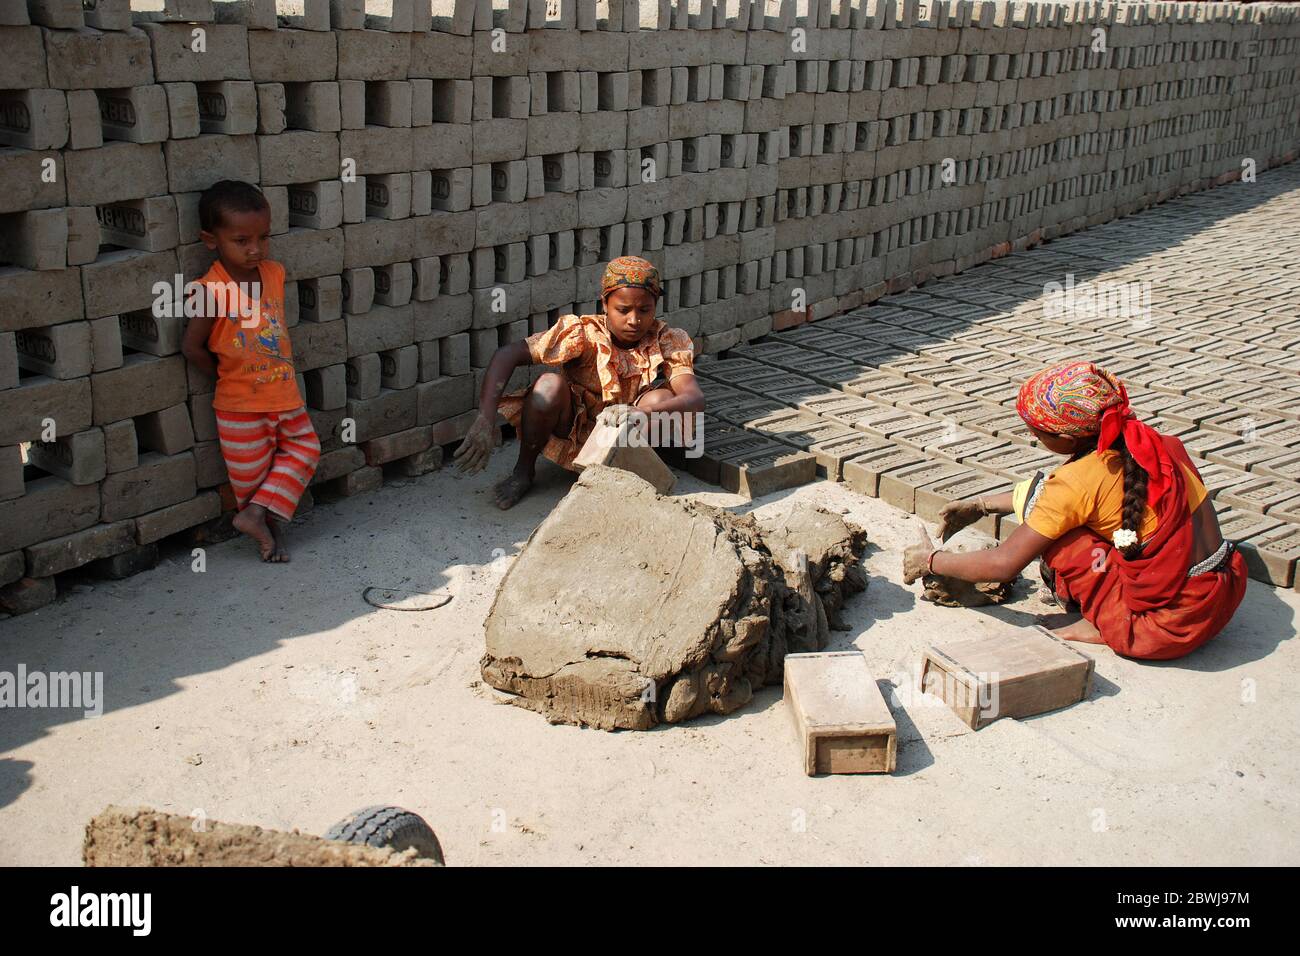 Labourers prepare bricks at a brick kiln in Sarberia, West Bengal, India. The Indian brick industry is the second largest in the world after China. Stock Photo